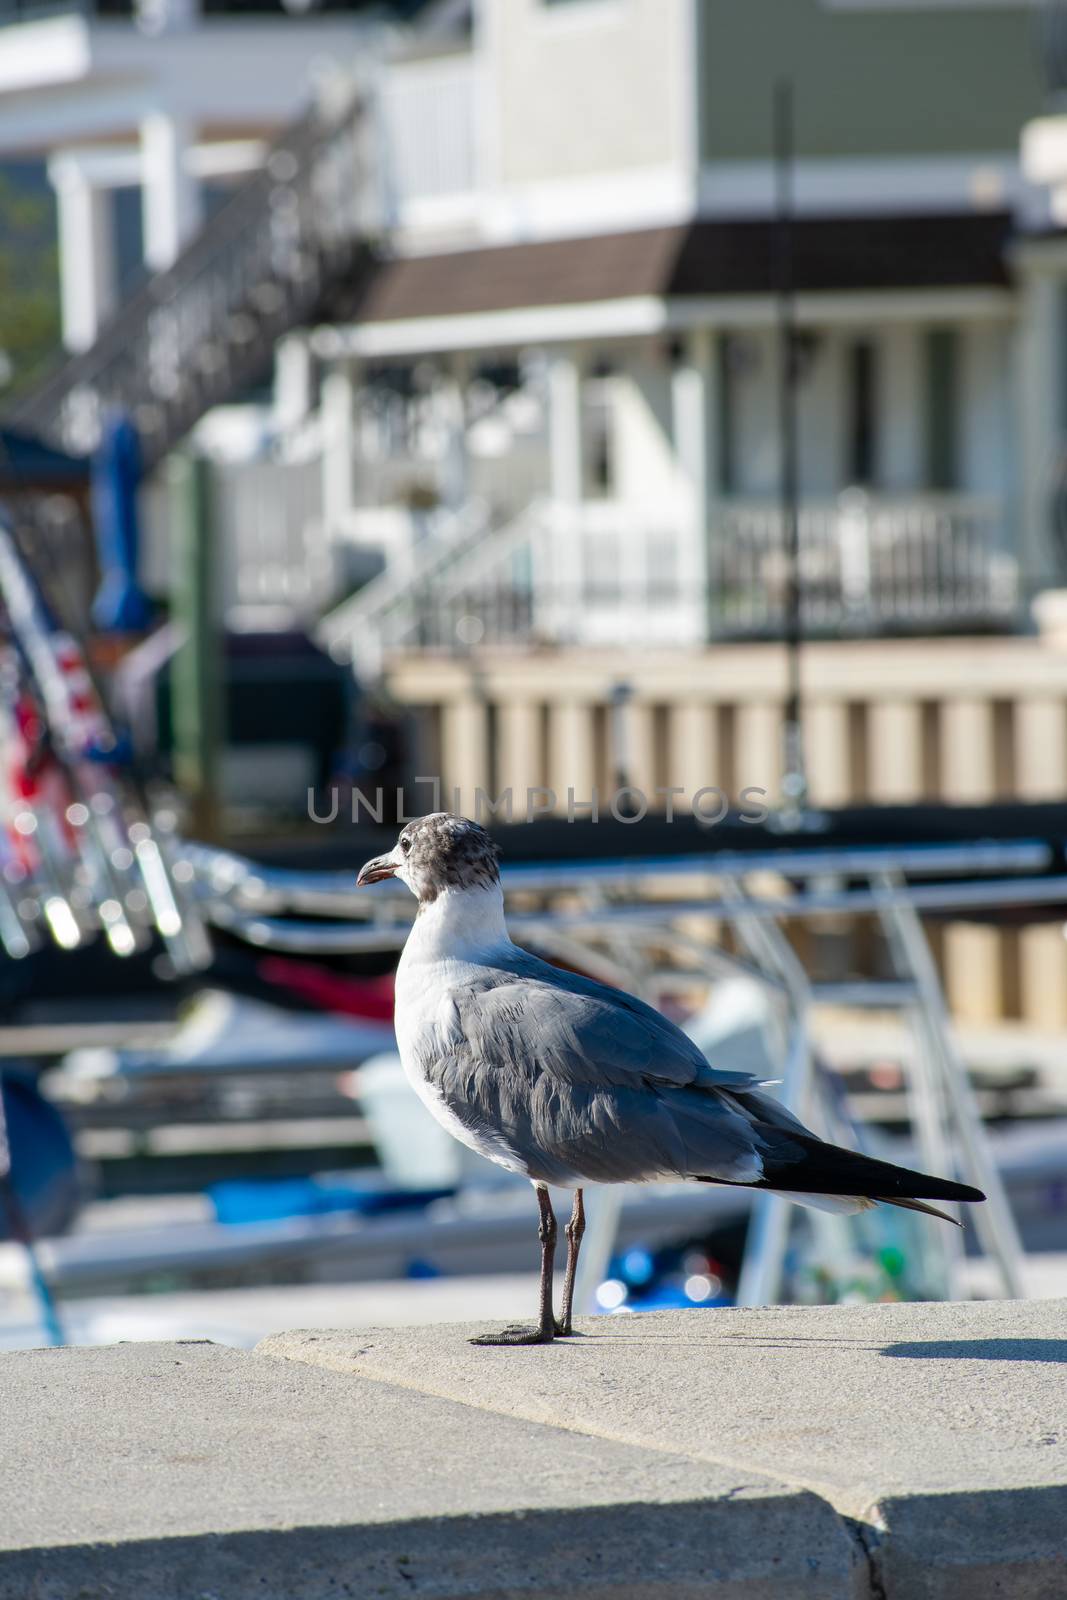 A Seagull Standing on a Ledge Near Boats and Water Looking Off in the Distance